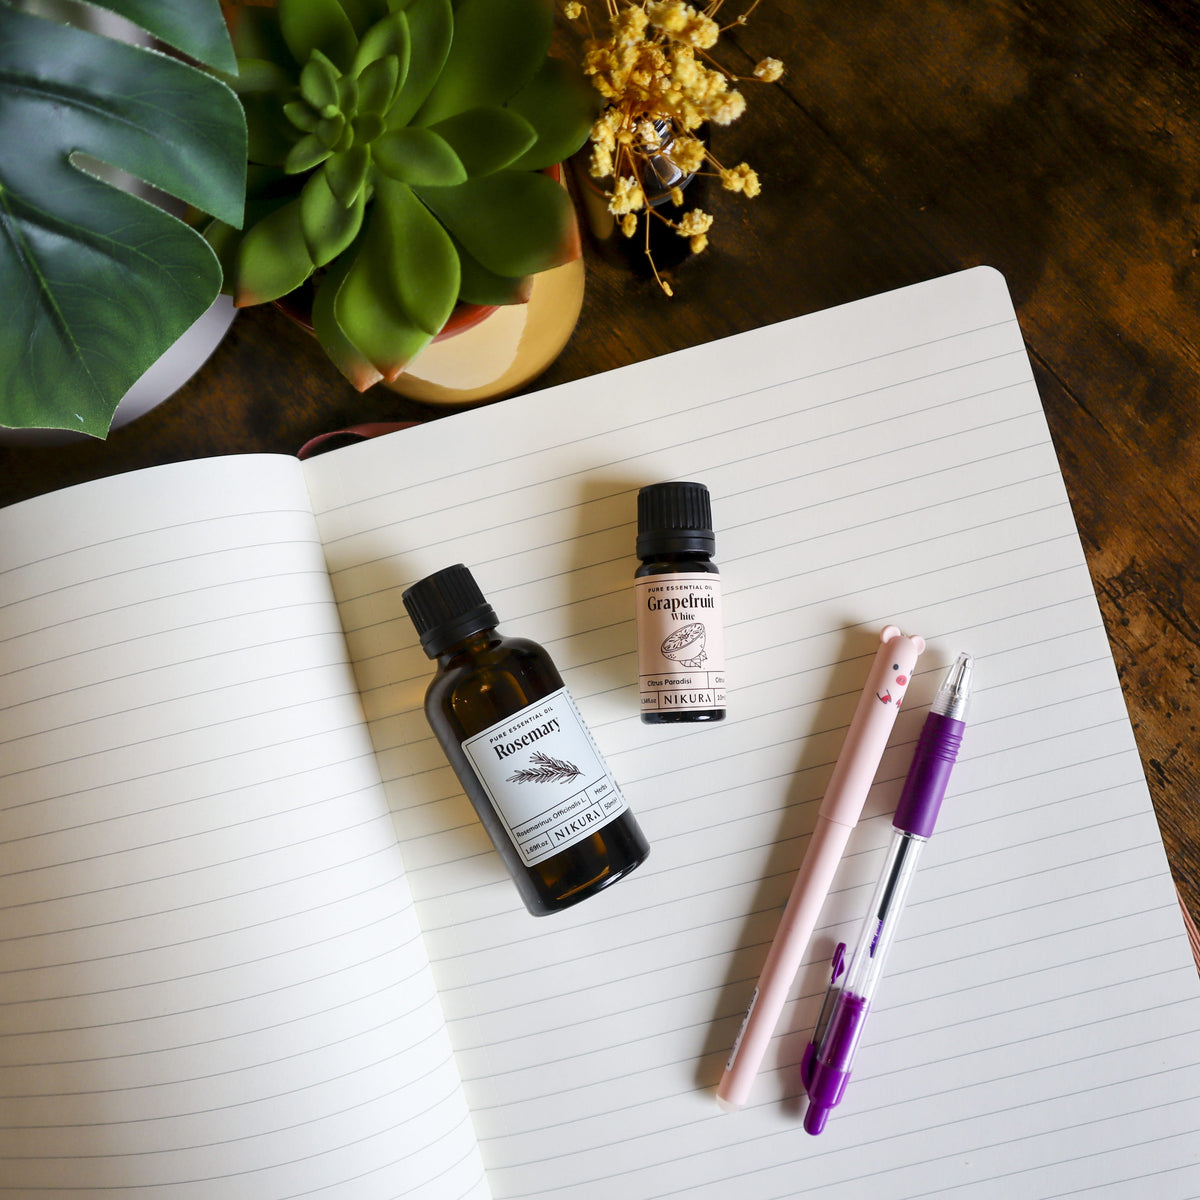 5 Ways to Use Essential Oils Without a Diffuser